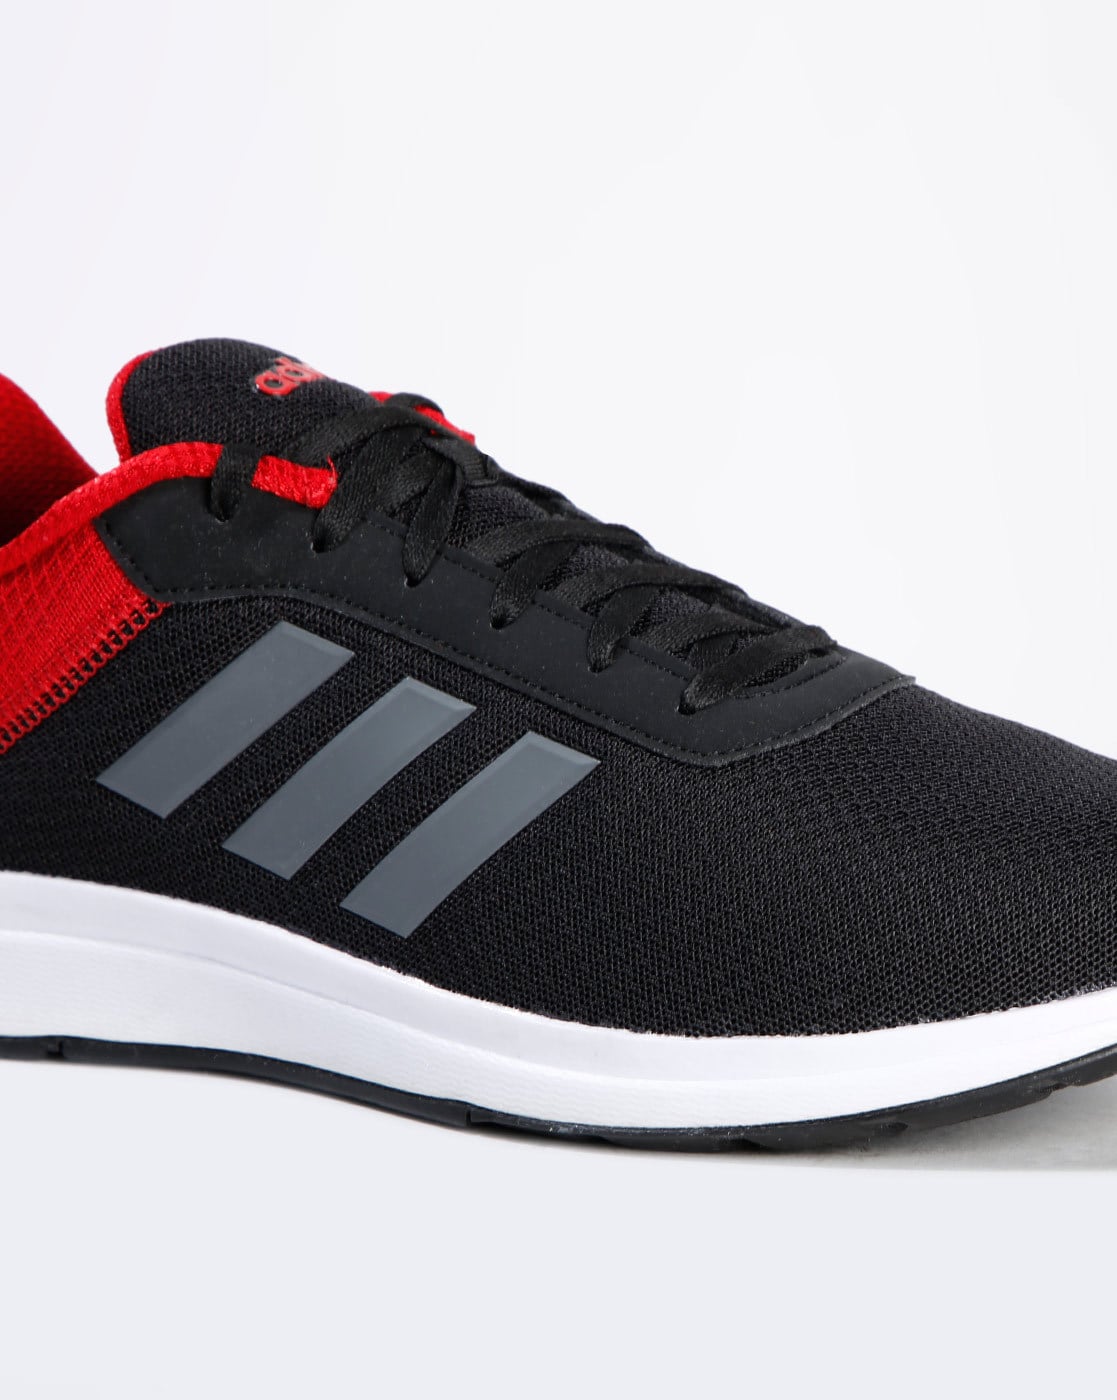 adidas red black shoes